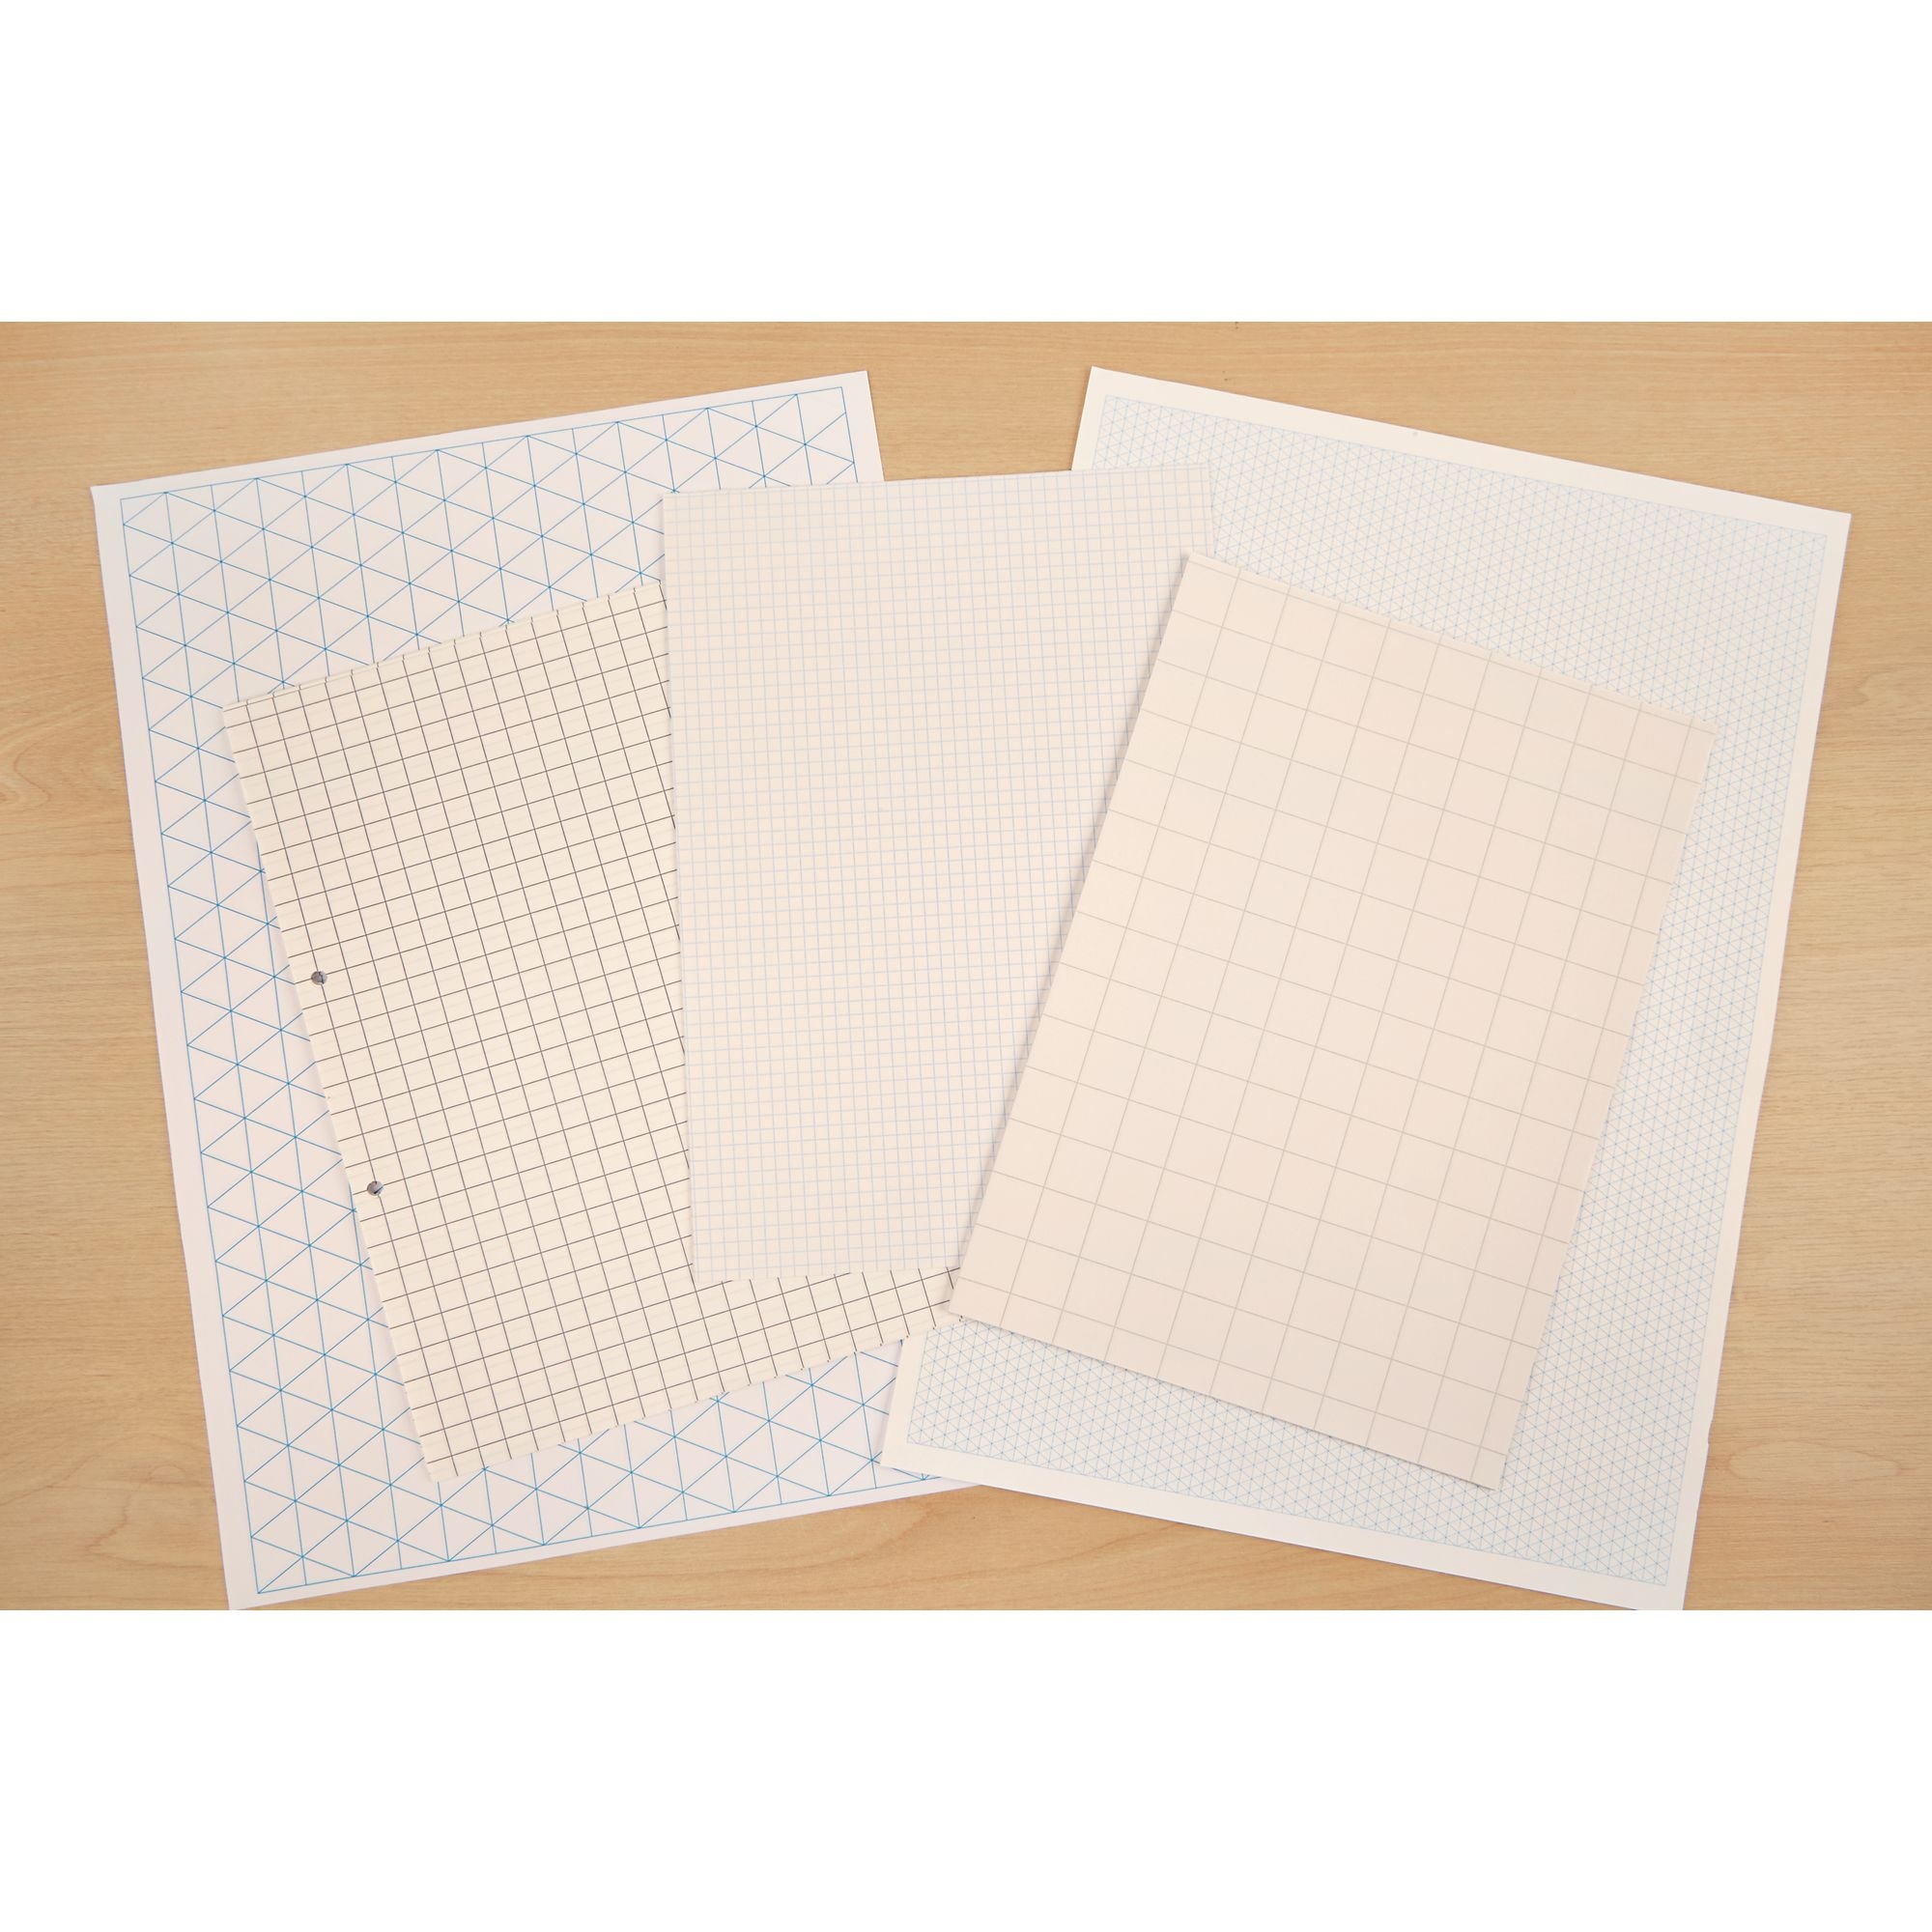 A3 Isometric Paper, 5mm Isometric Grid, Unpunched - 1 Ream